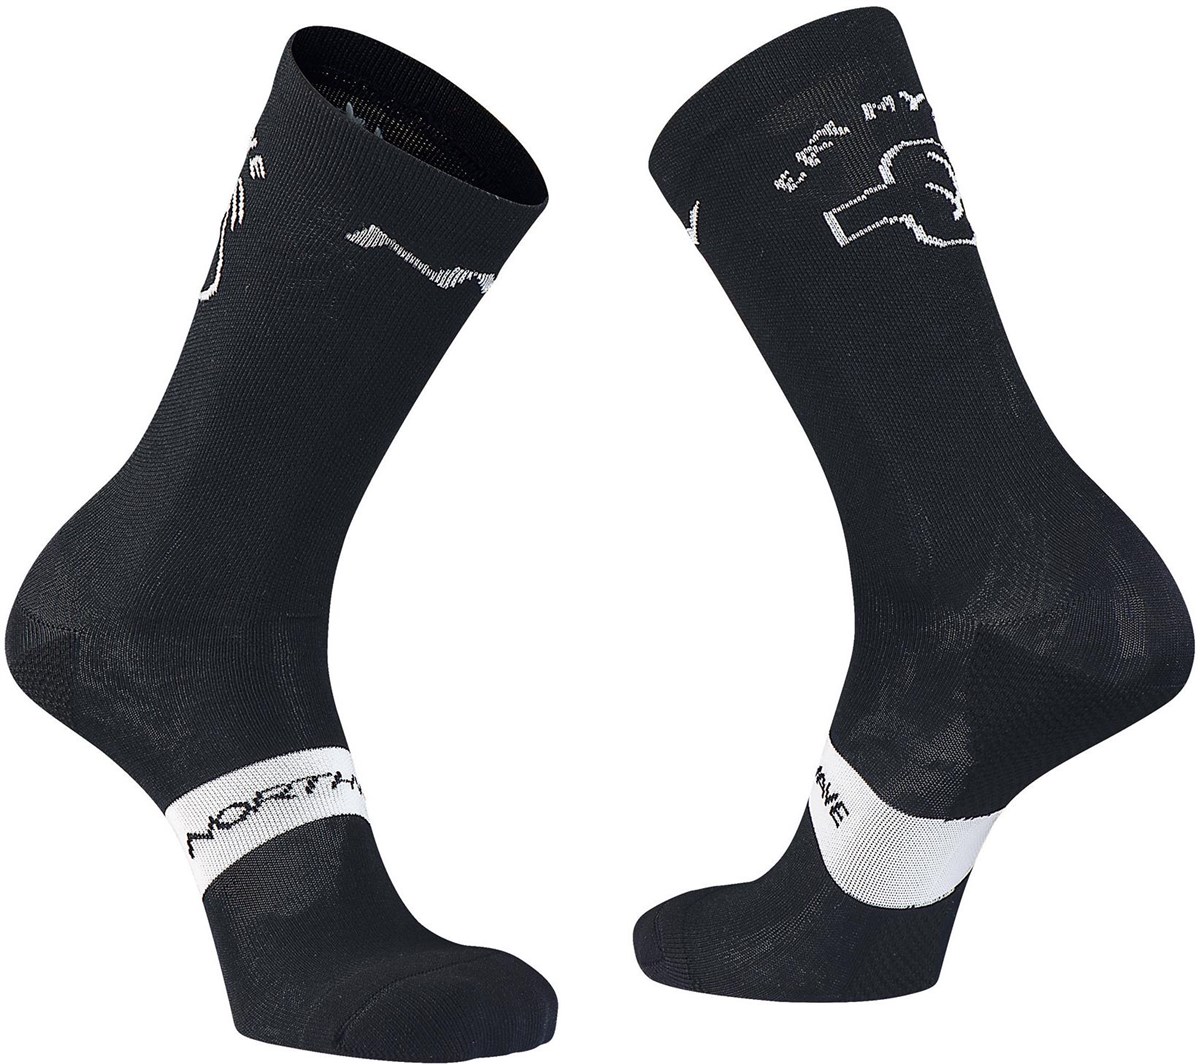 Northwave East My Dust Wool Winter Cycling Socks product image